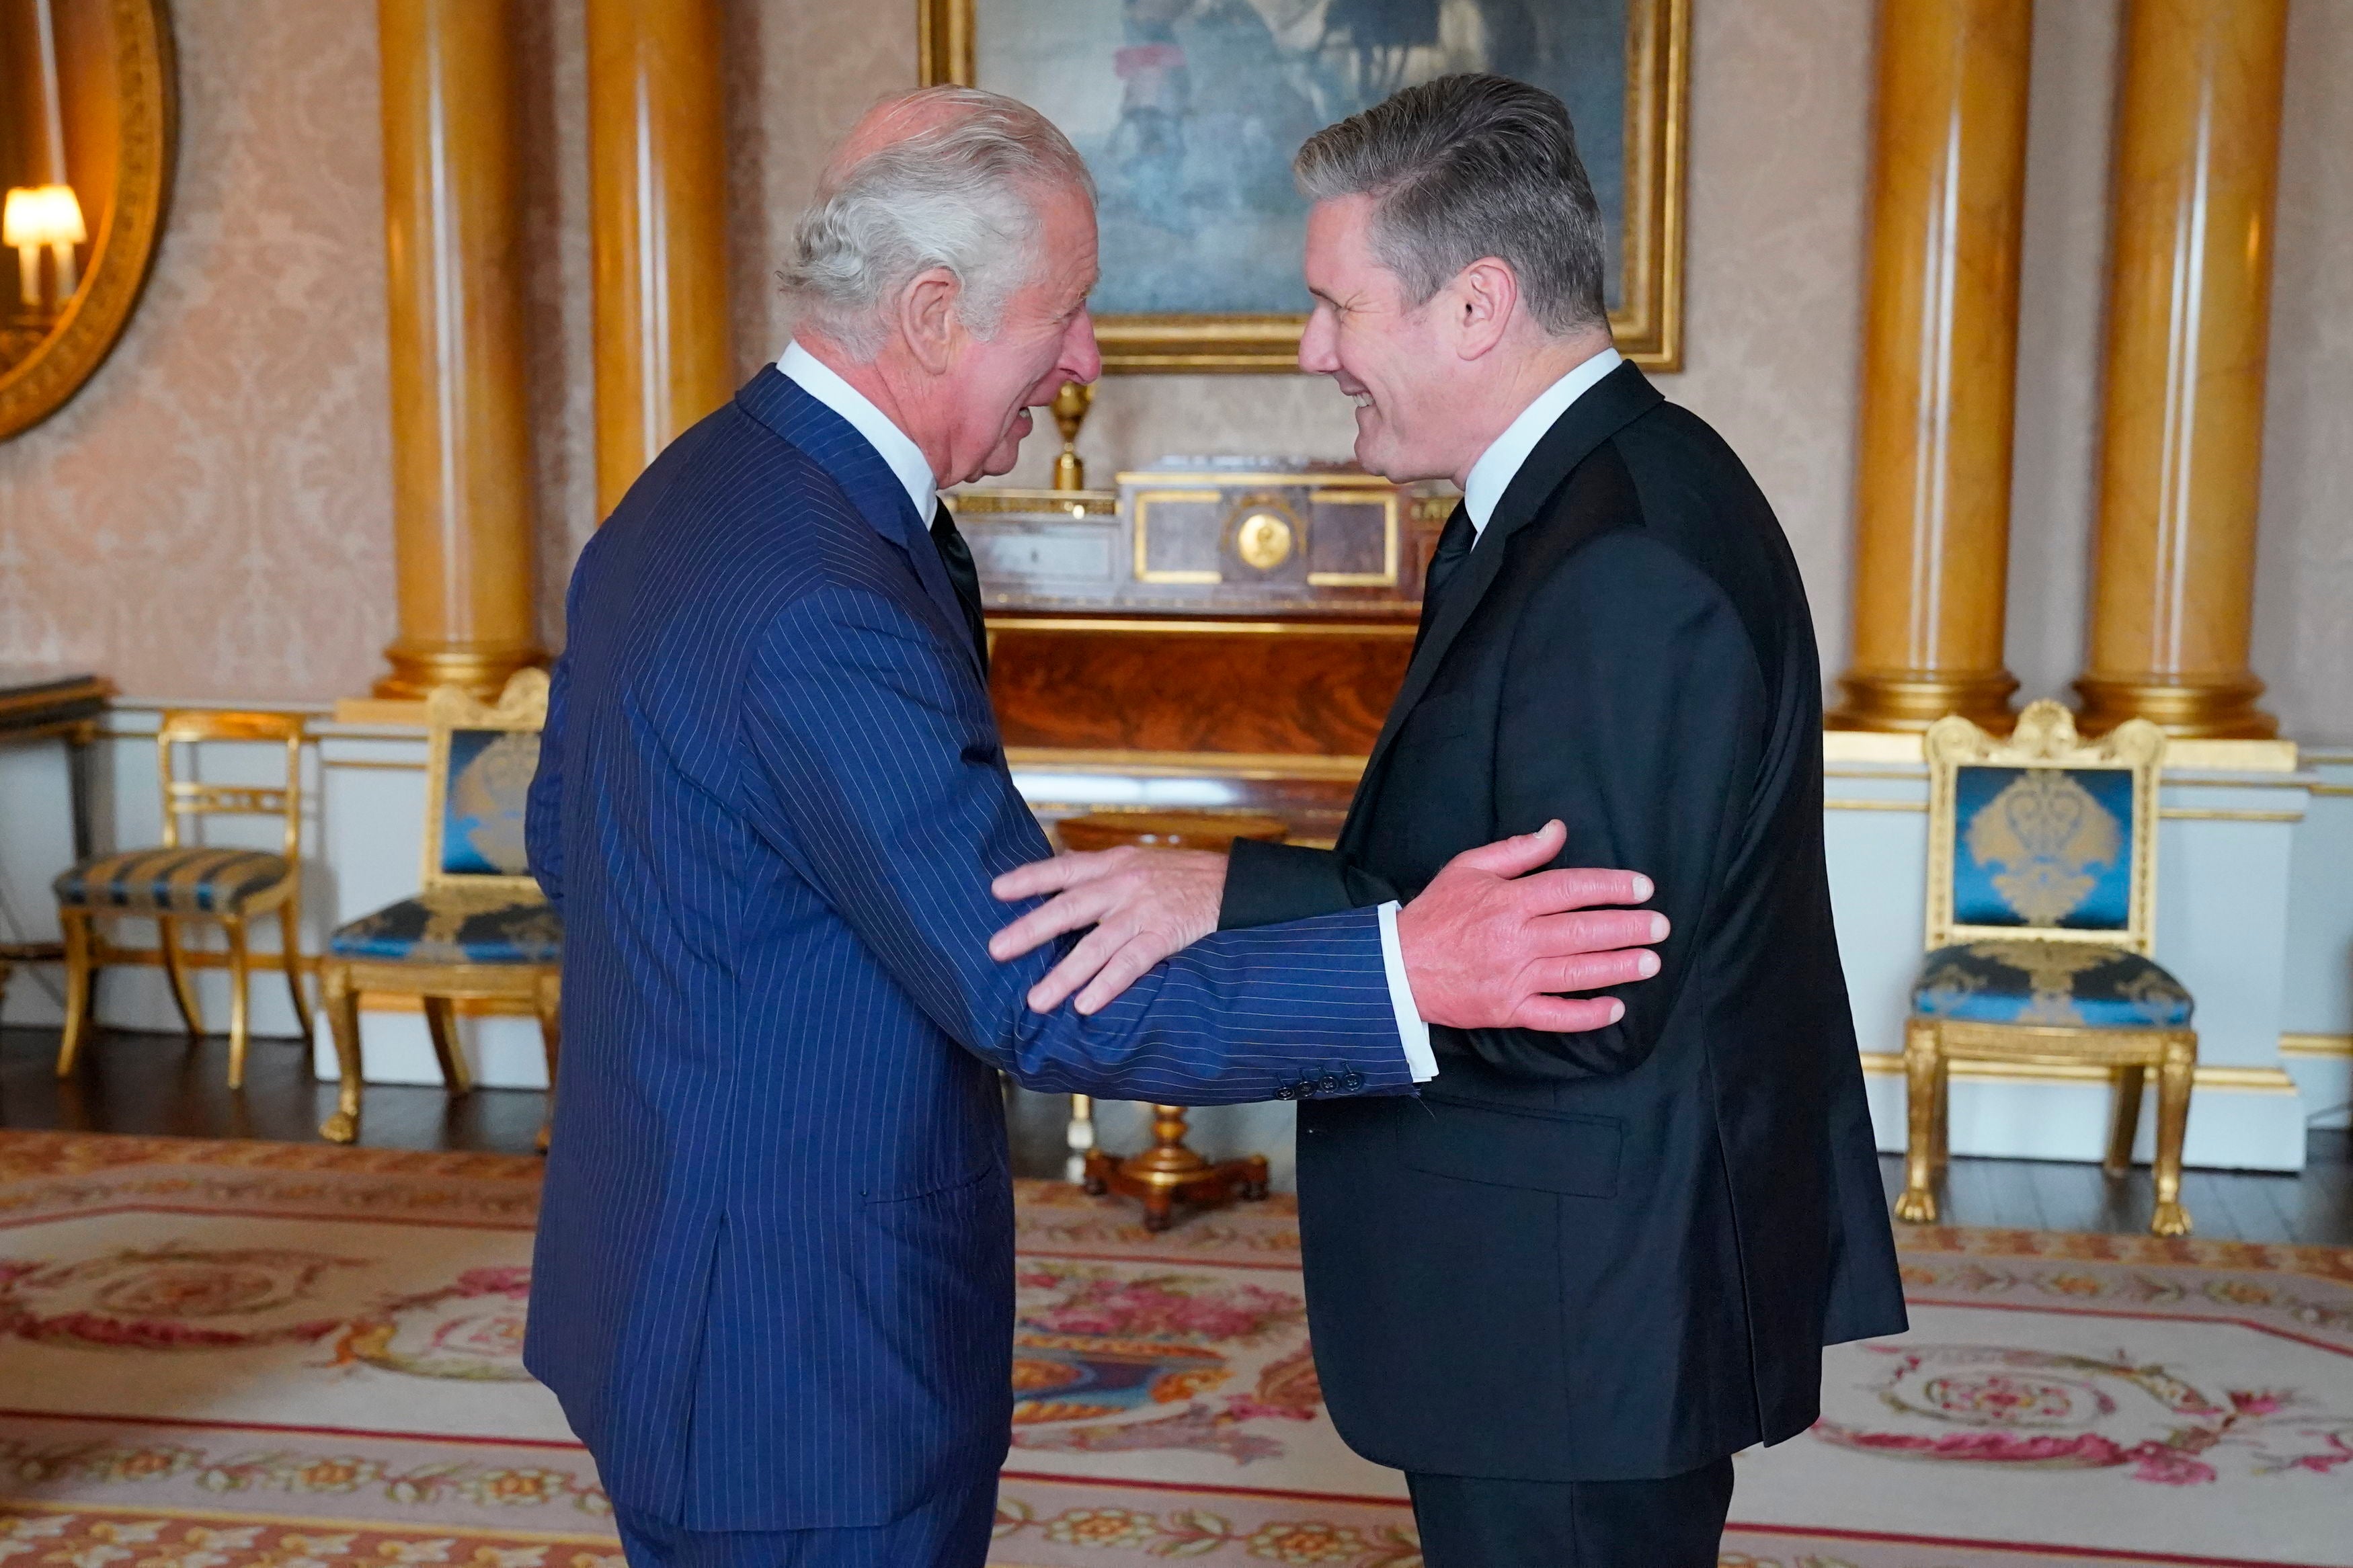 King Charles and Keir Starmer are reported to have a warm relationship.